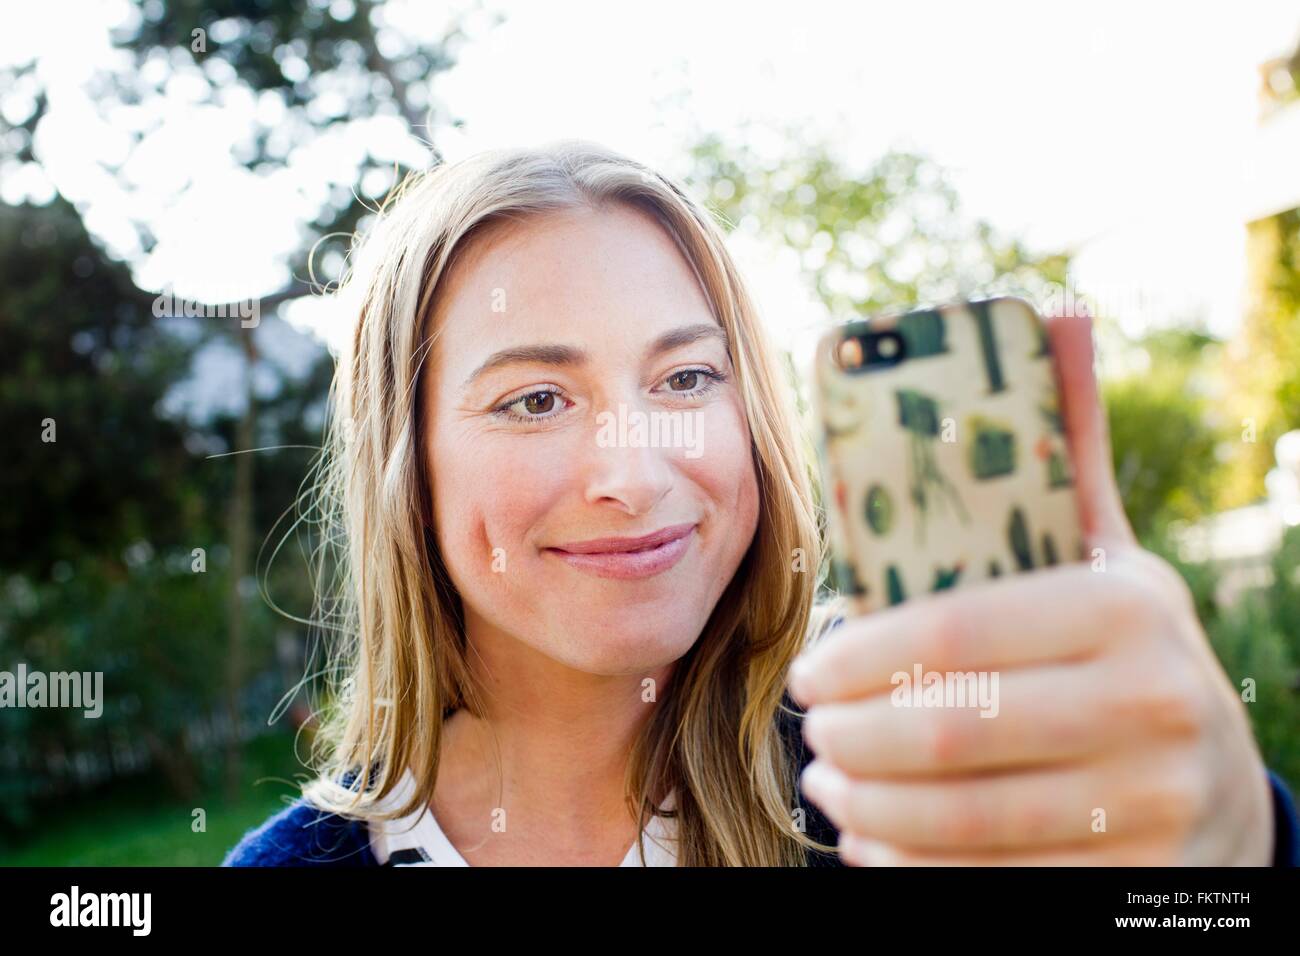 Mid adult woman holding smartphone Banque D'Images